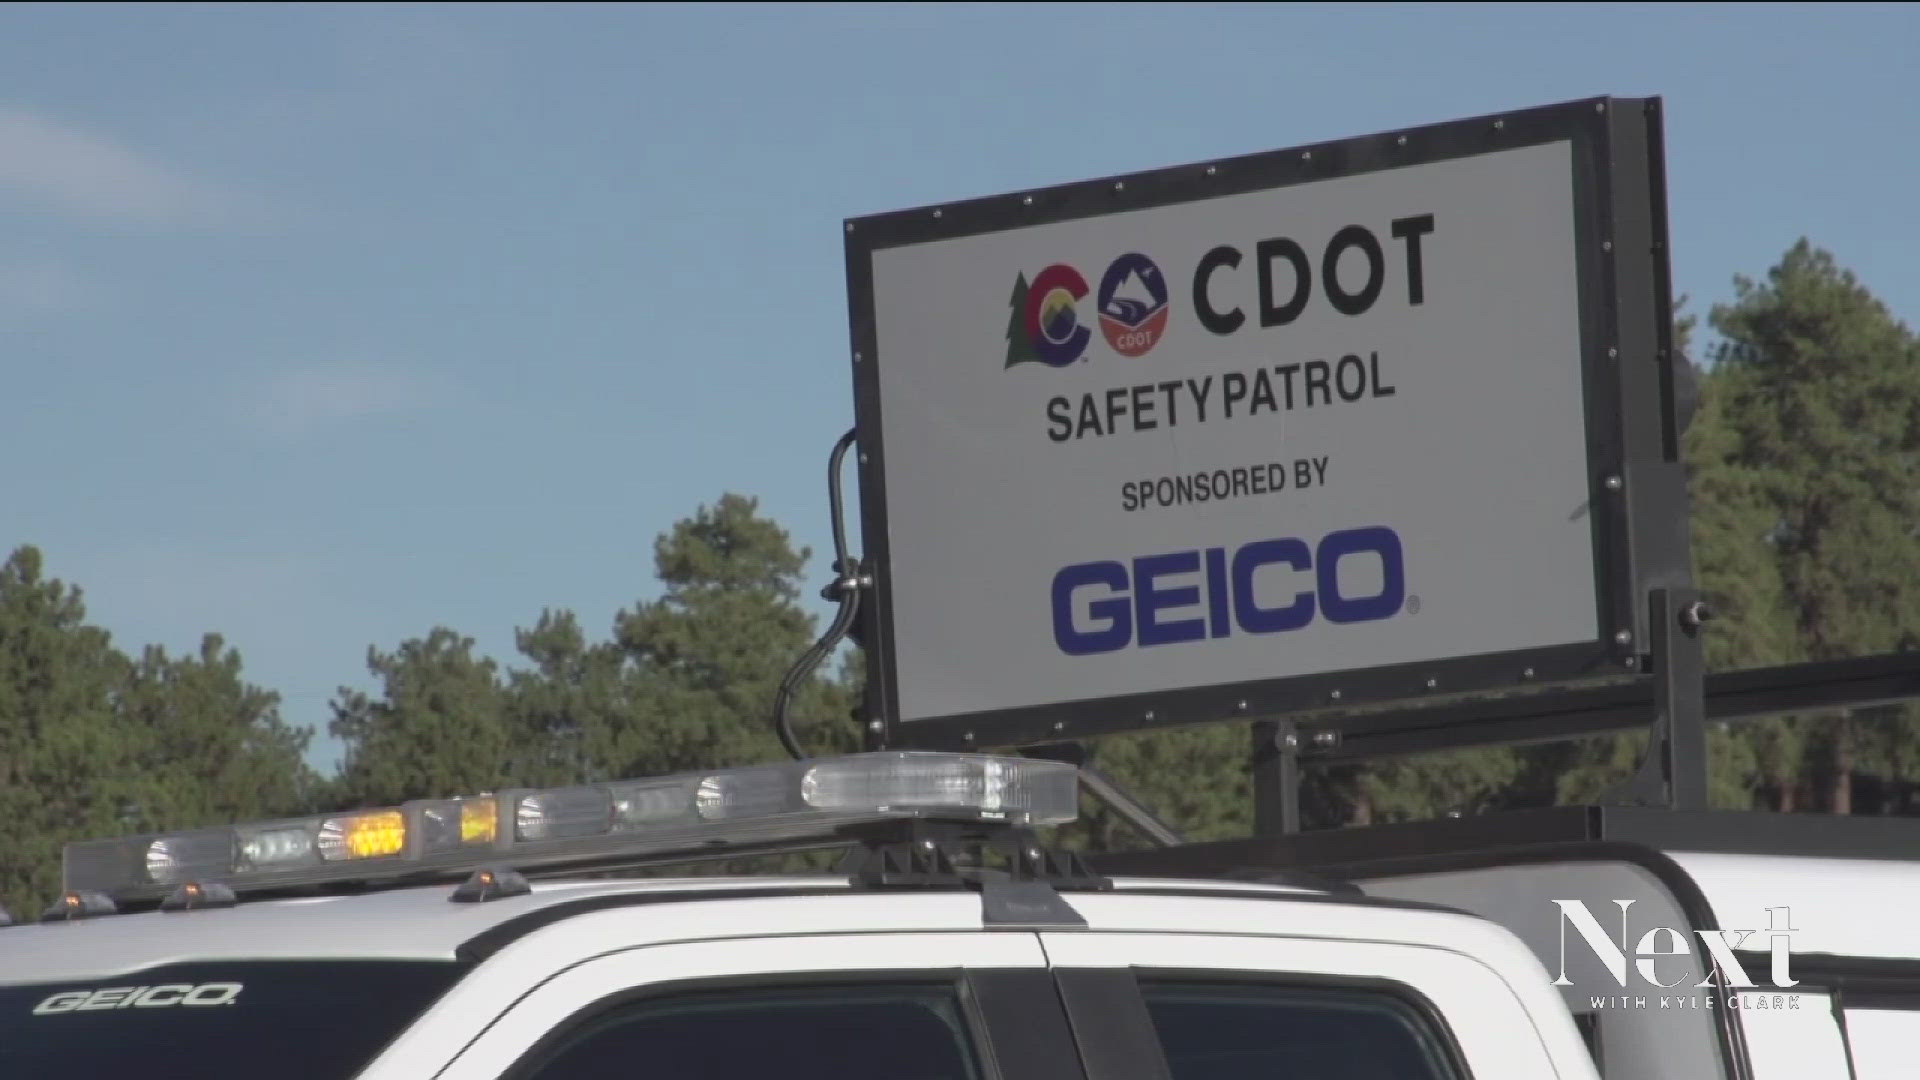 GEICO's sponsorship provides about half a million dollars of funding for the safety patrol program each year. The other $5.5 million is taxpayer funded.